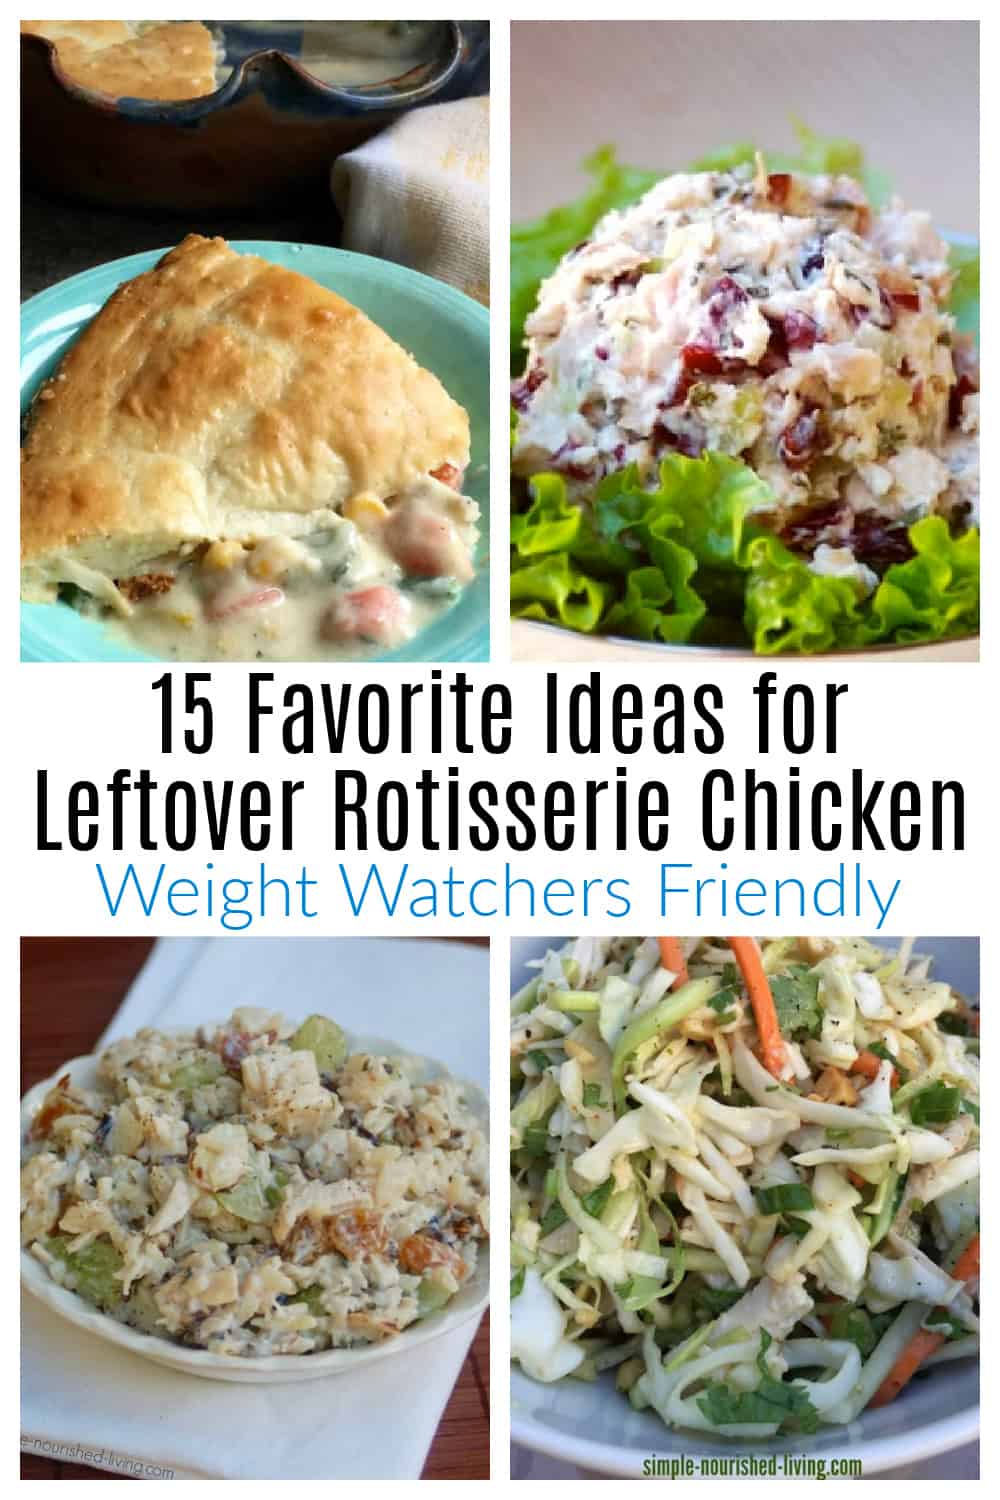 Favorite Easy & Delicious Ways to Use Rotisserie Chicken